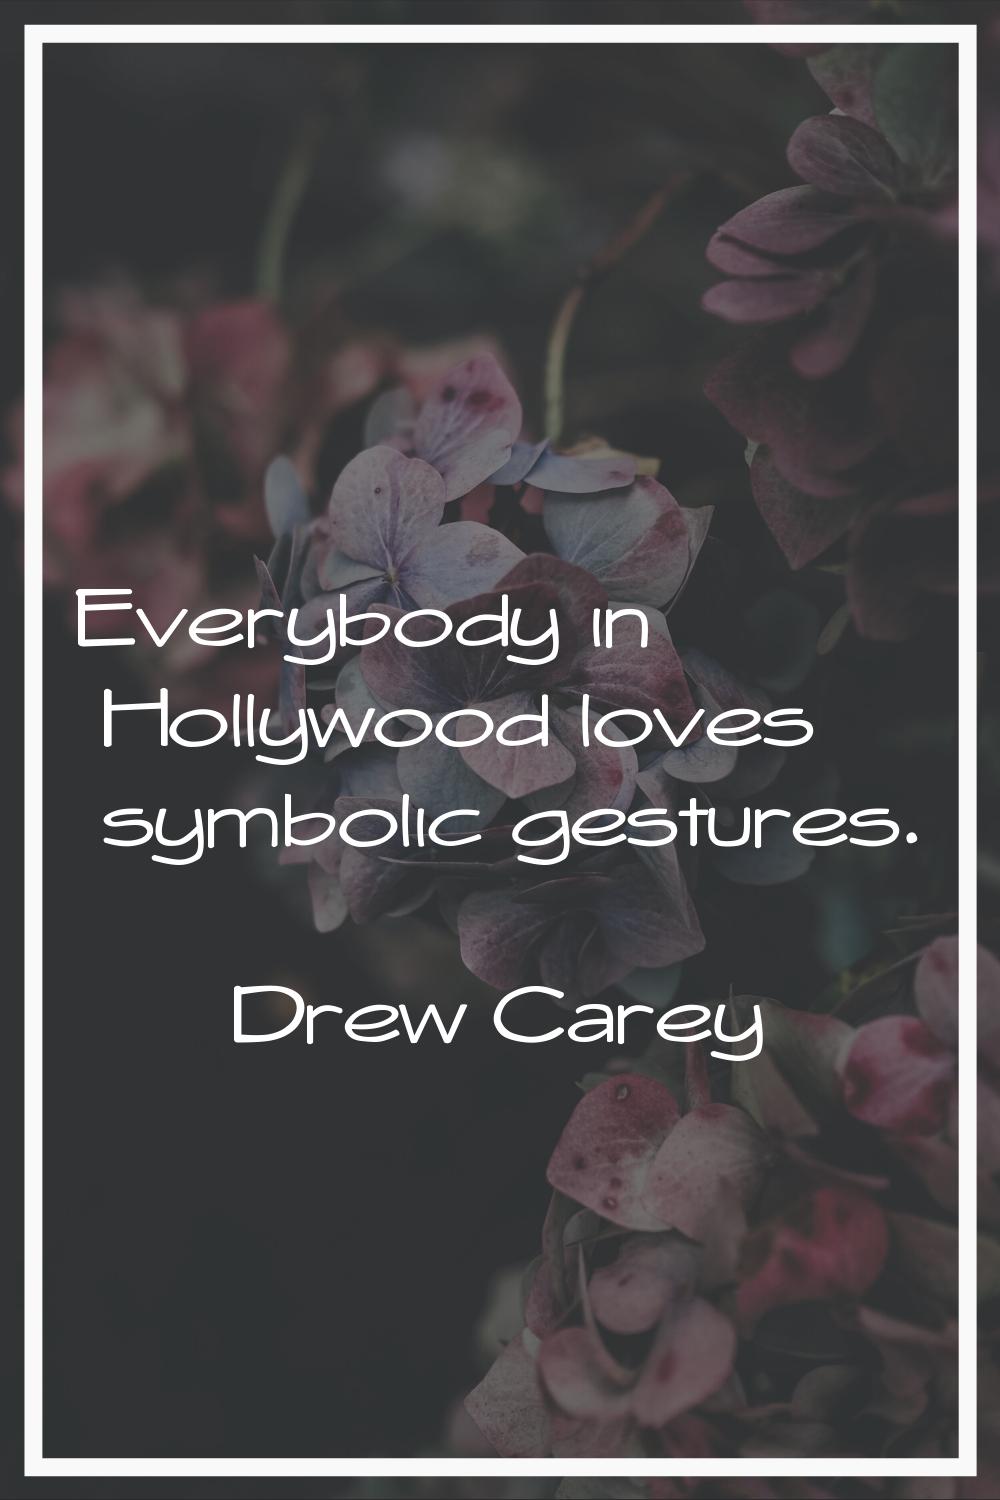 Everybody in Hollywood loves symbolic gestures.